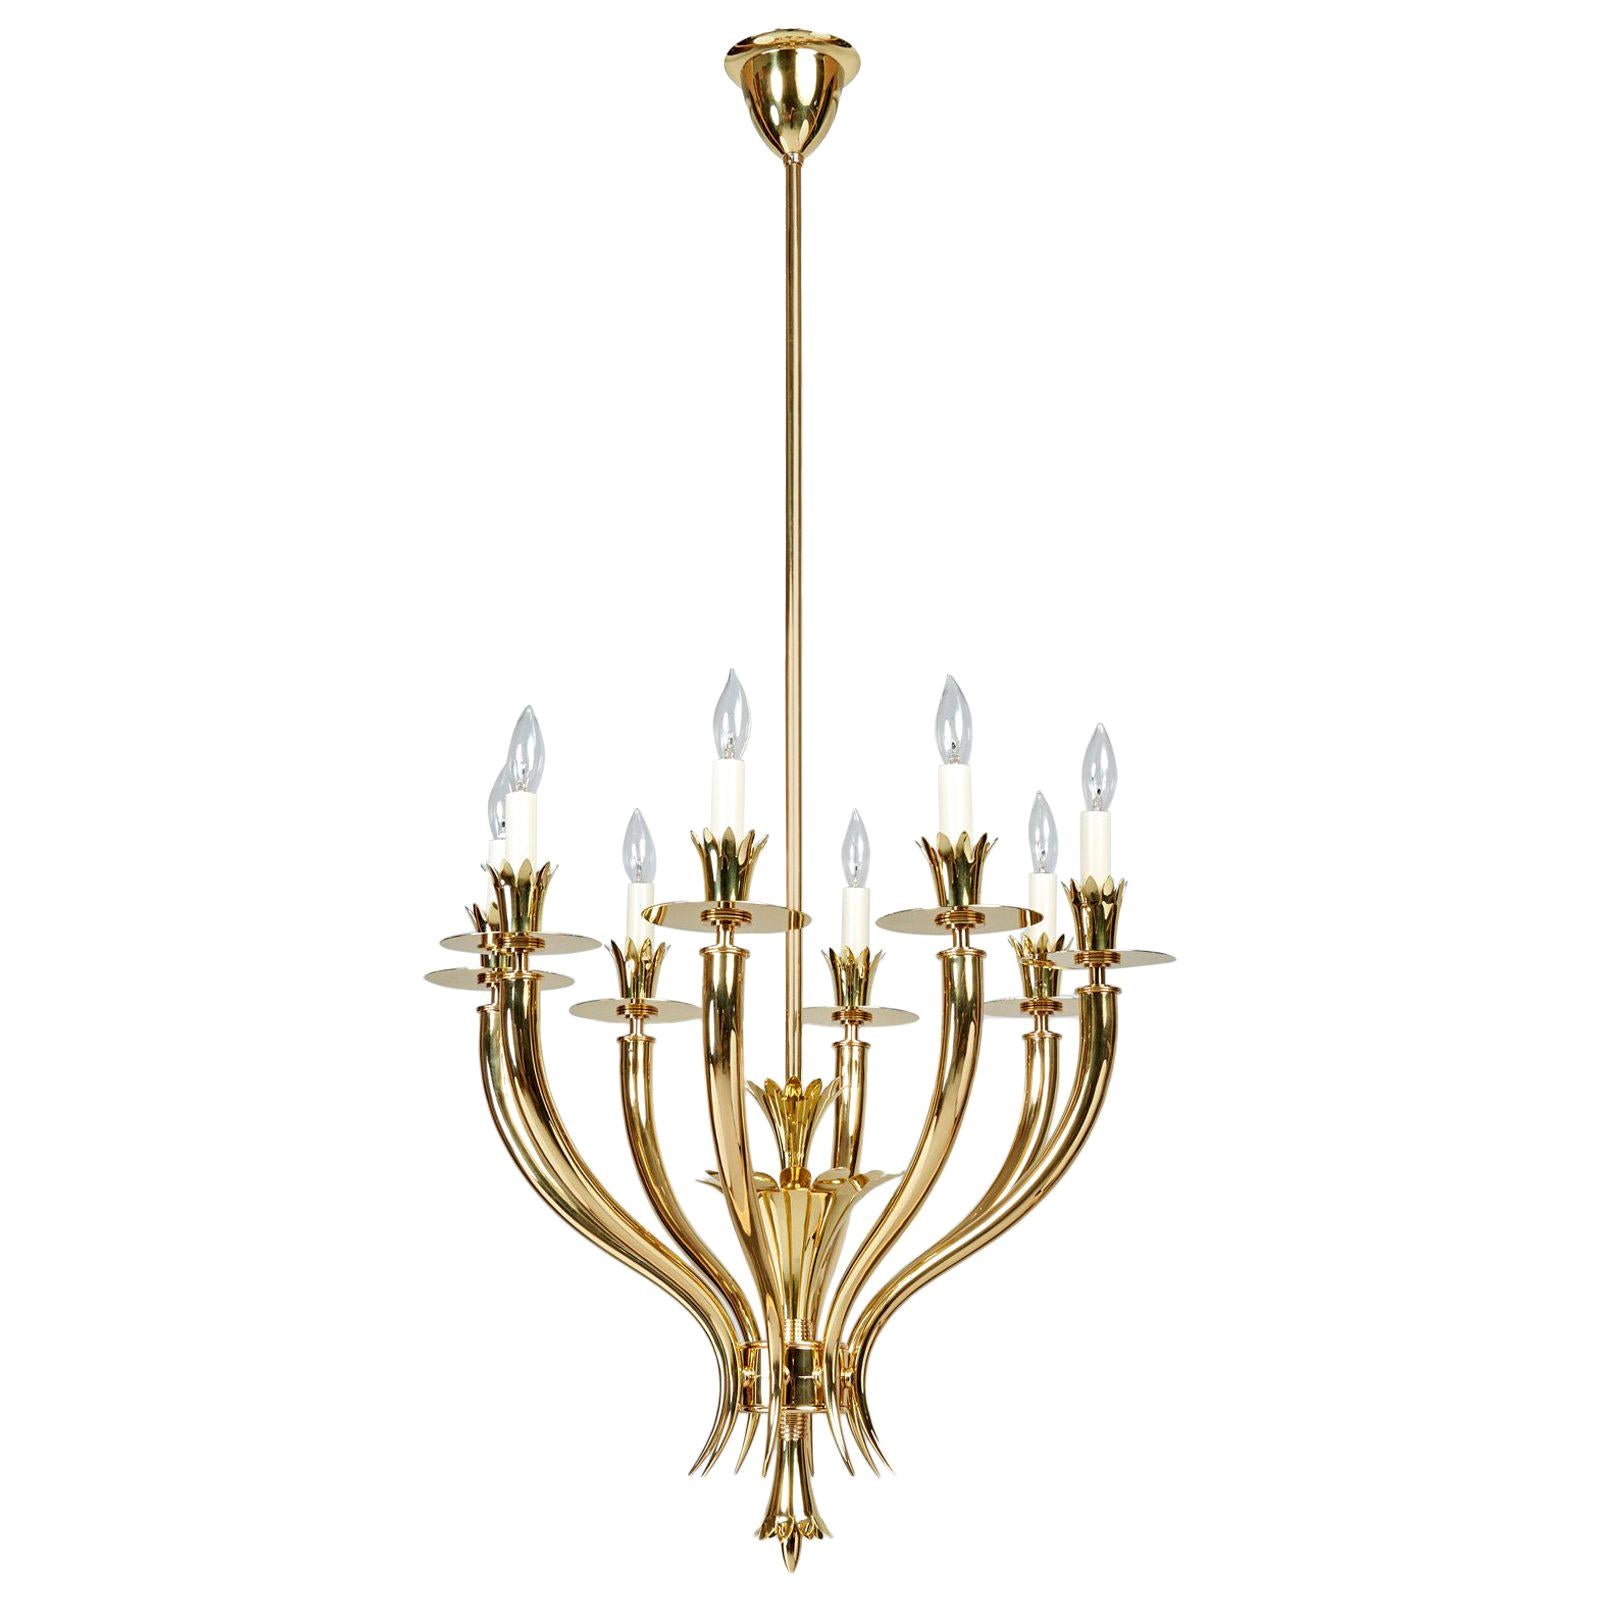 Gio Ponti: Important Geometric 8-Arm Chandelier in Polished Brass, Italy 1930s For Sale